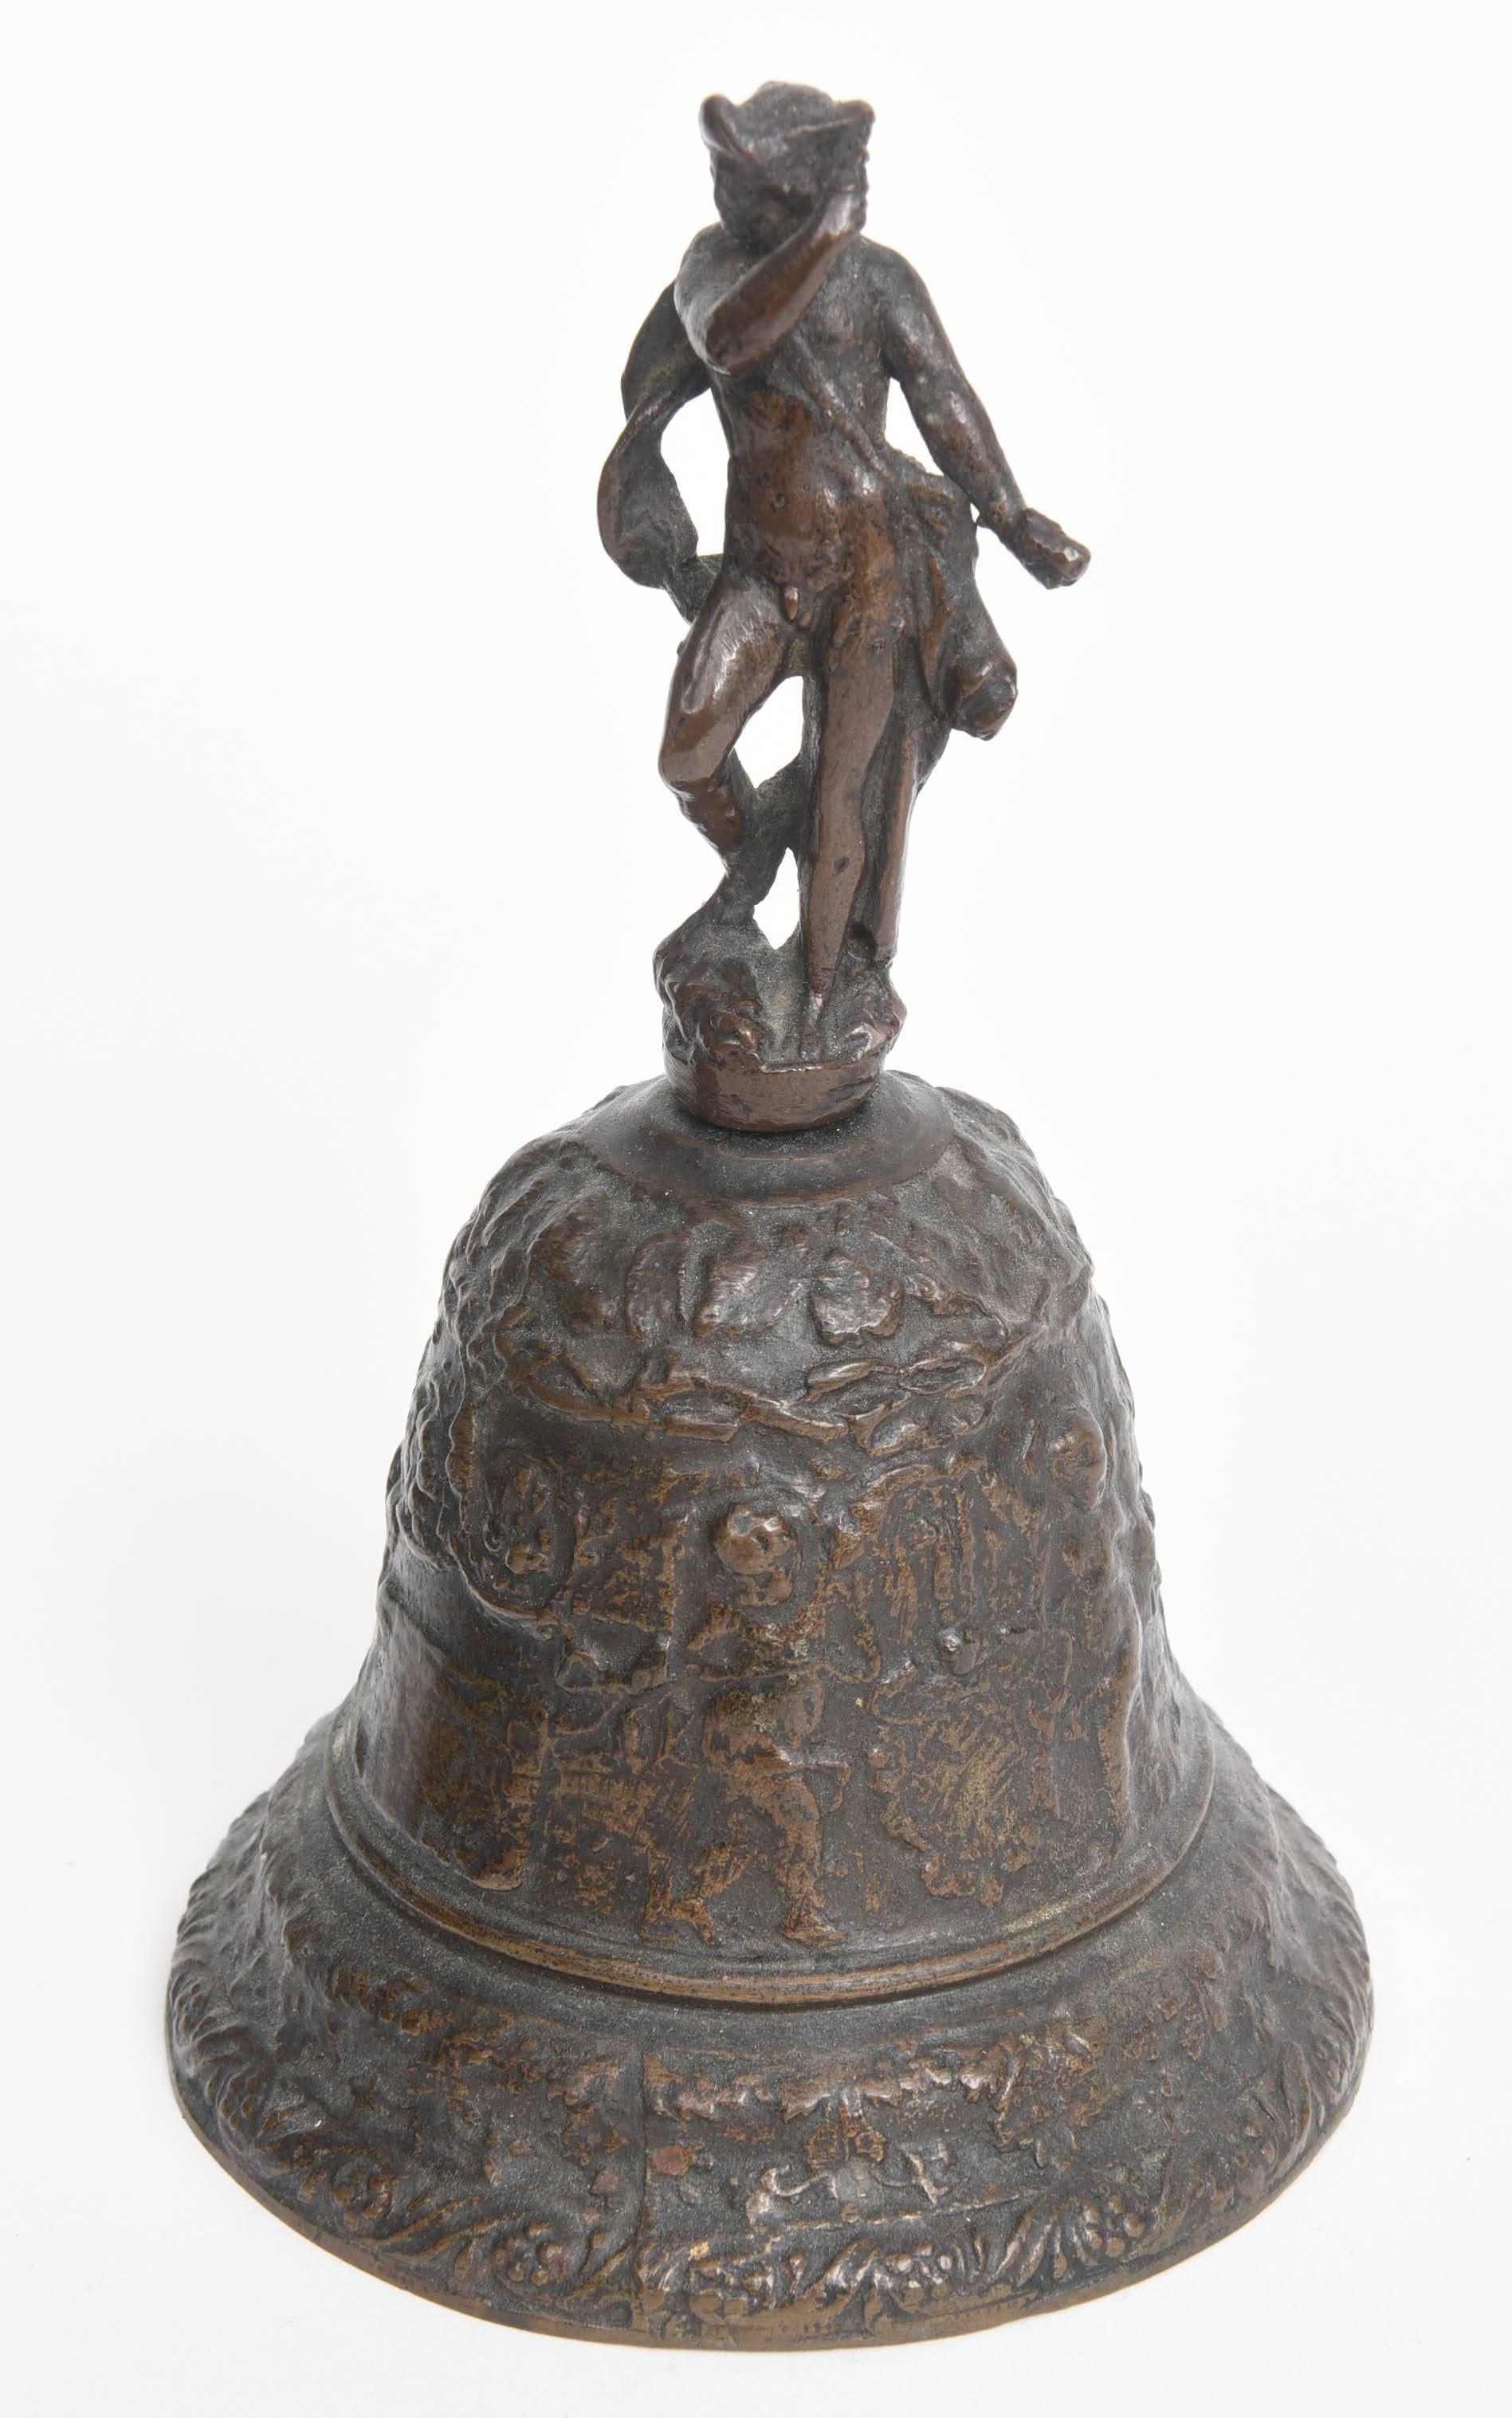 These bronze cast bells are of the type made in Venice in the 16th century.  Both are topped with figures of Mercury.  The larger of the two bells is decorated with reliefs of putti and garlands.  It measures 7